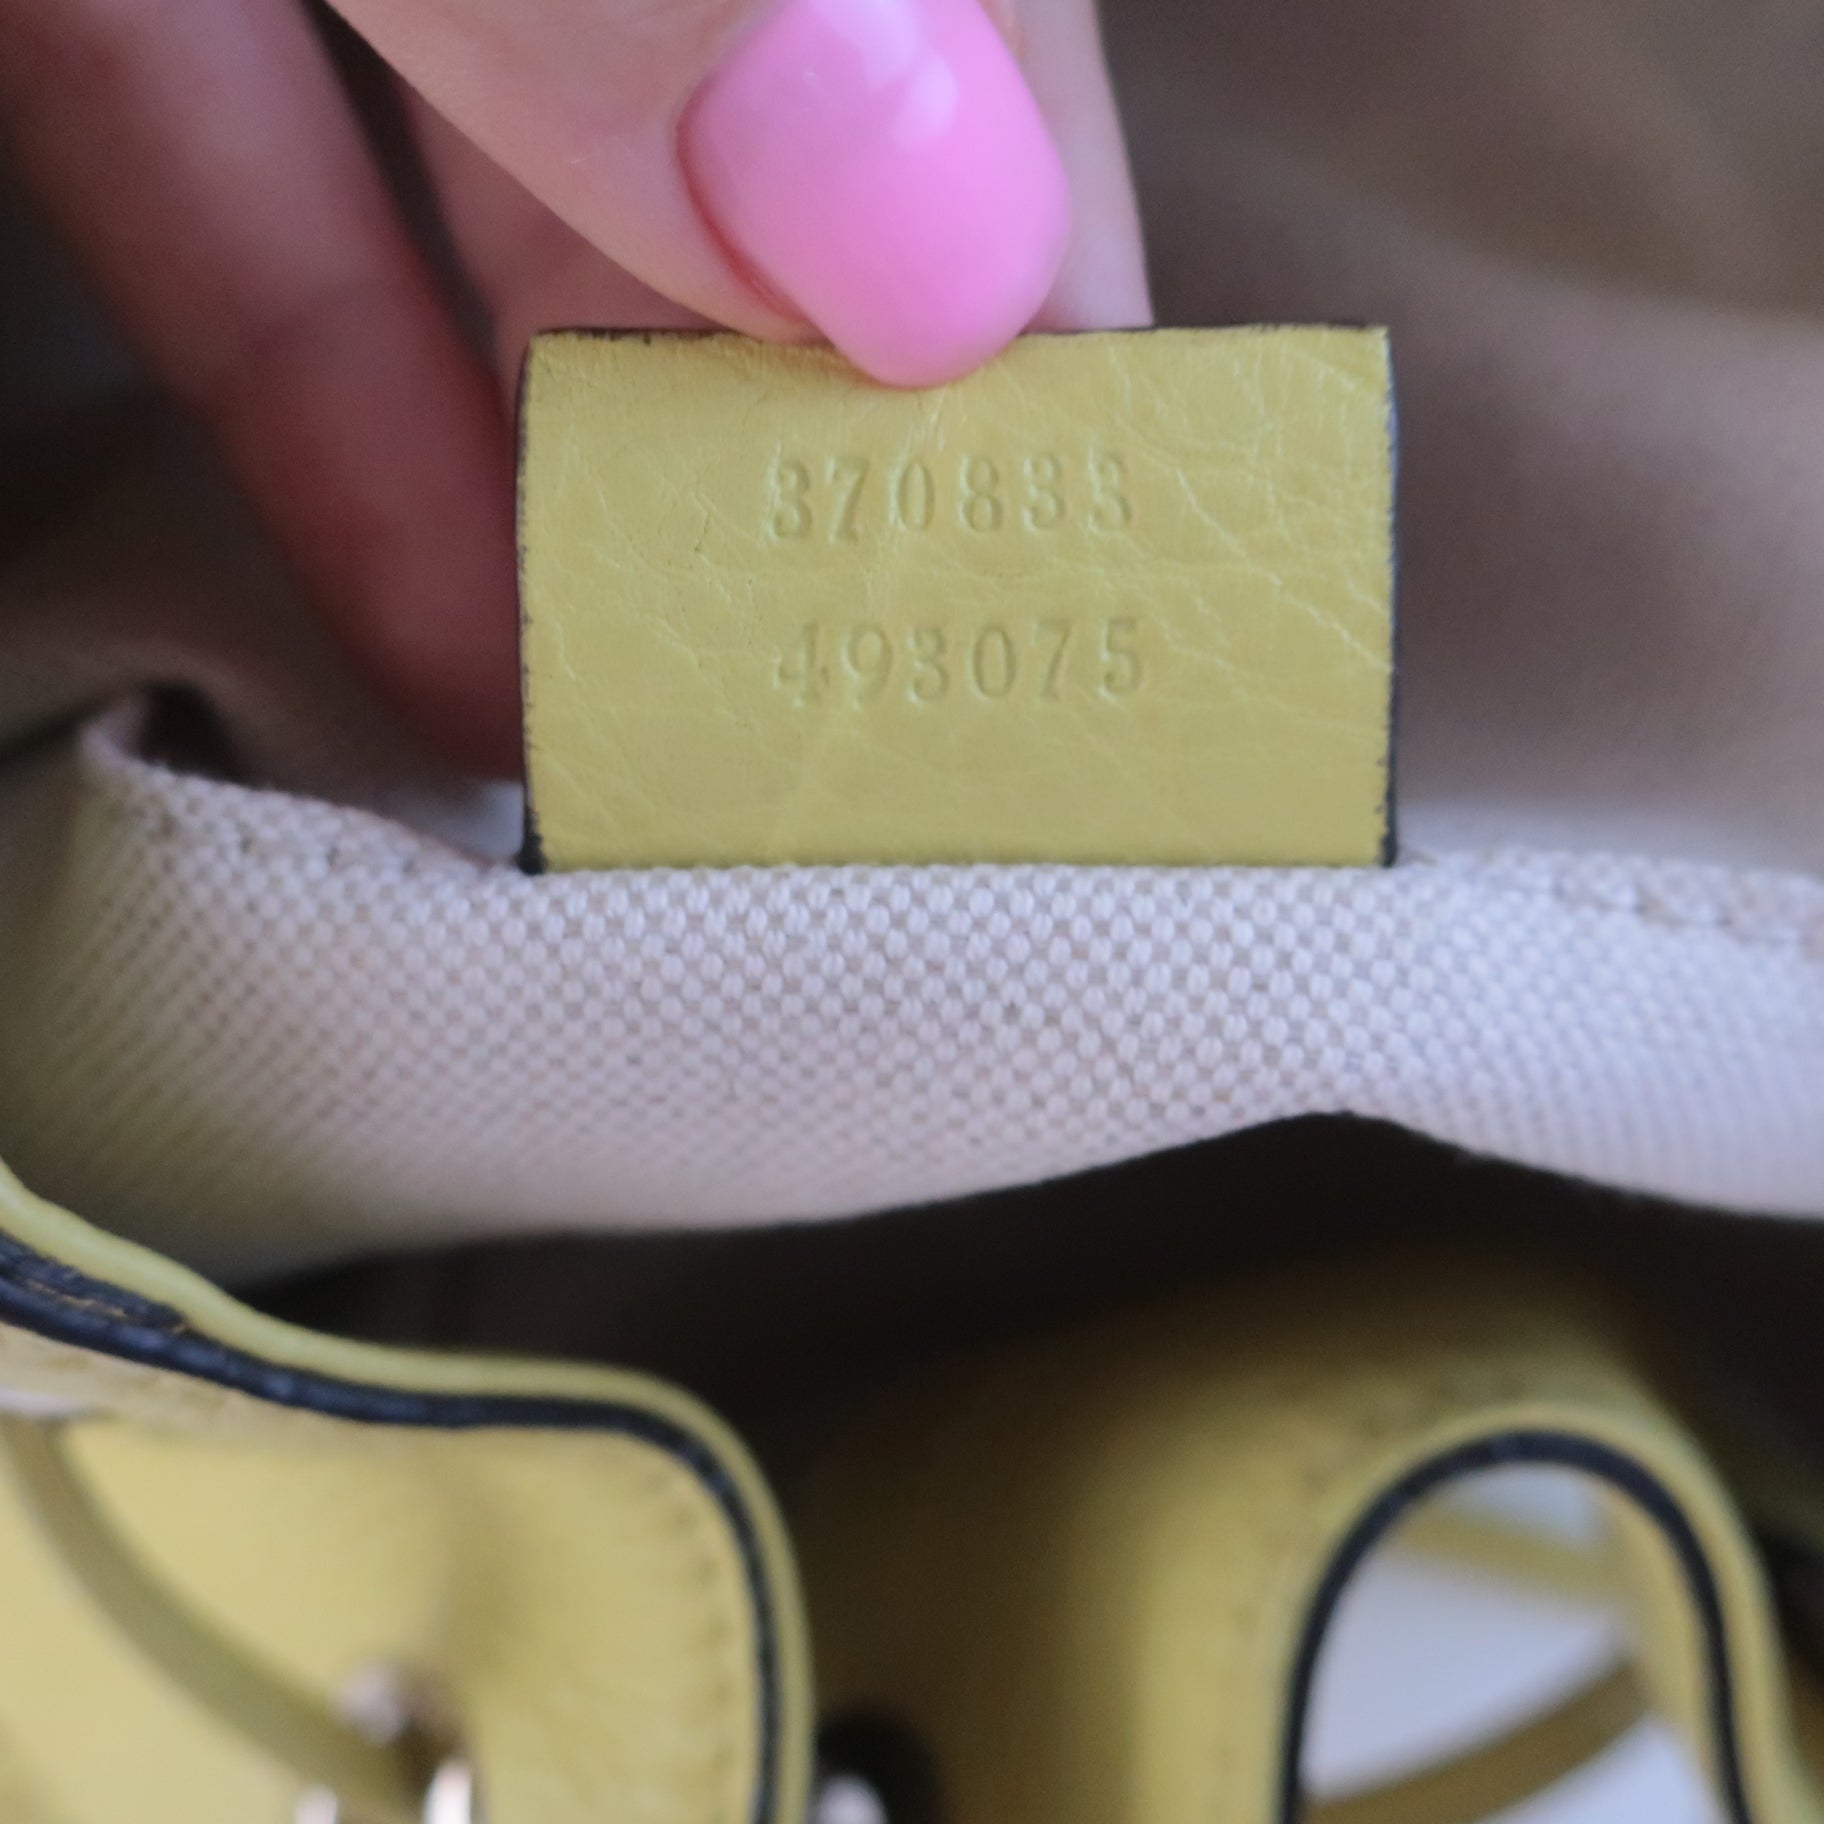 real authentic gucci bag serial number